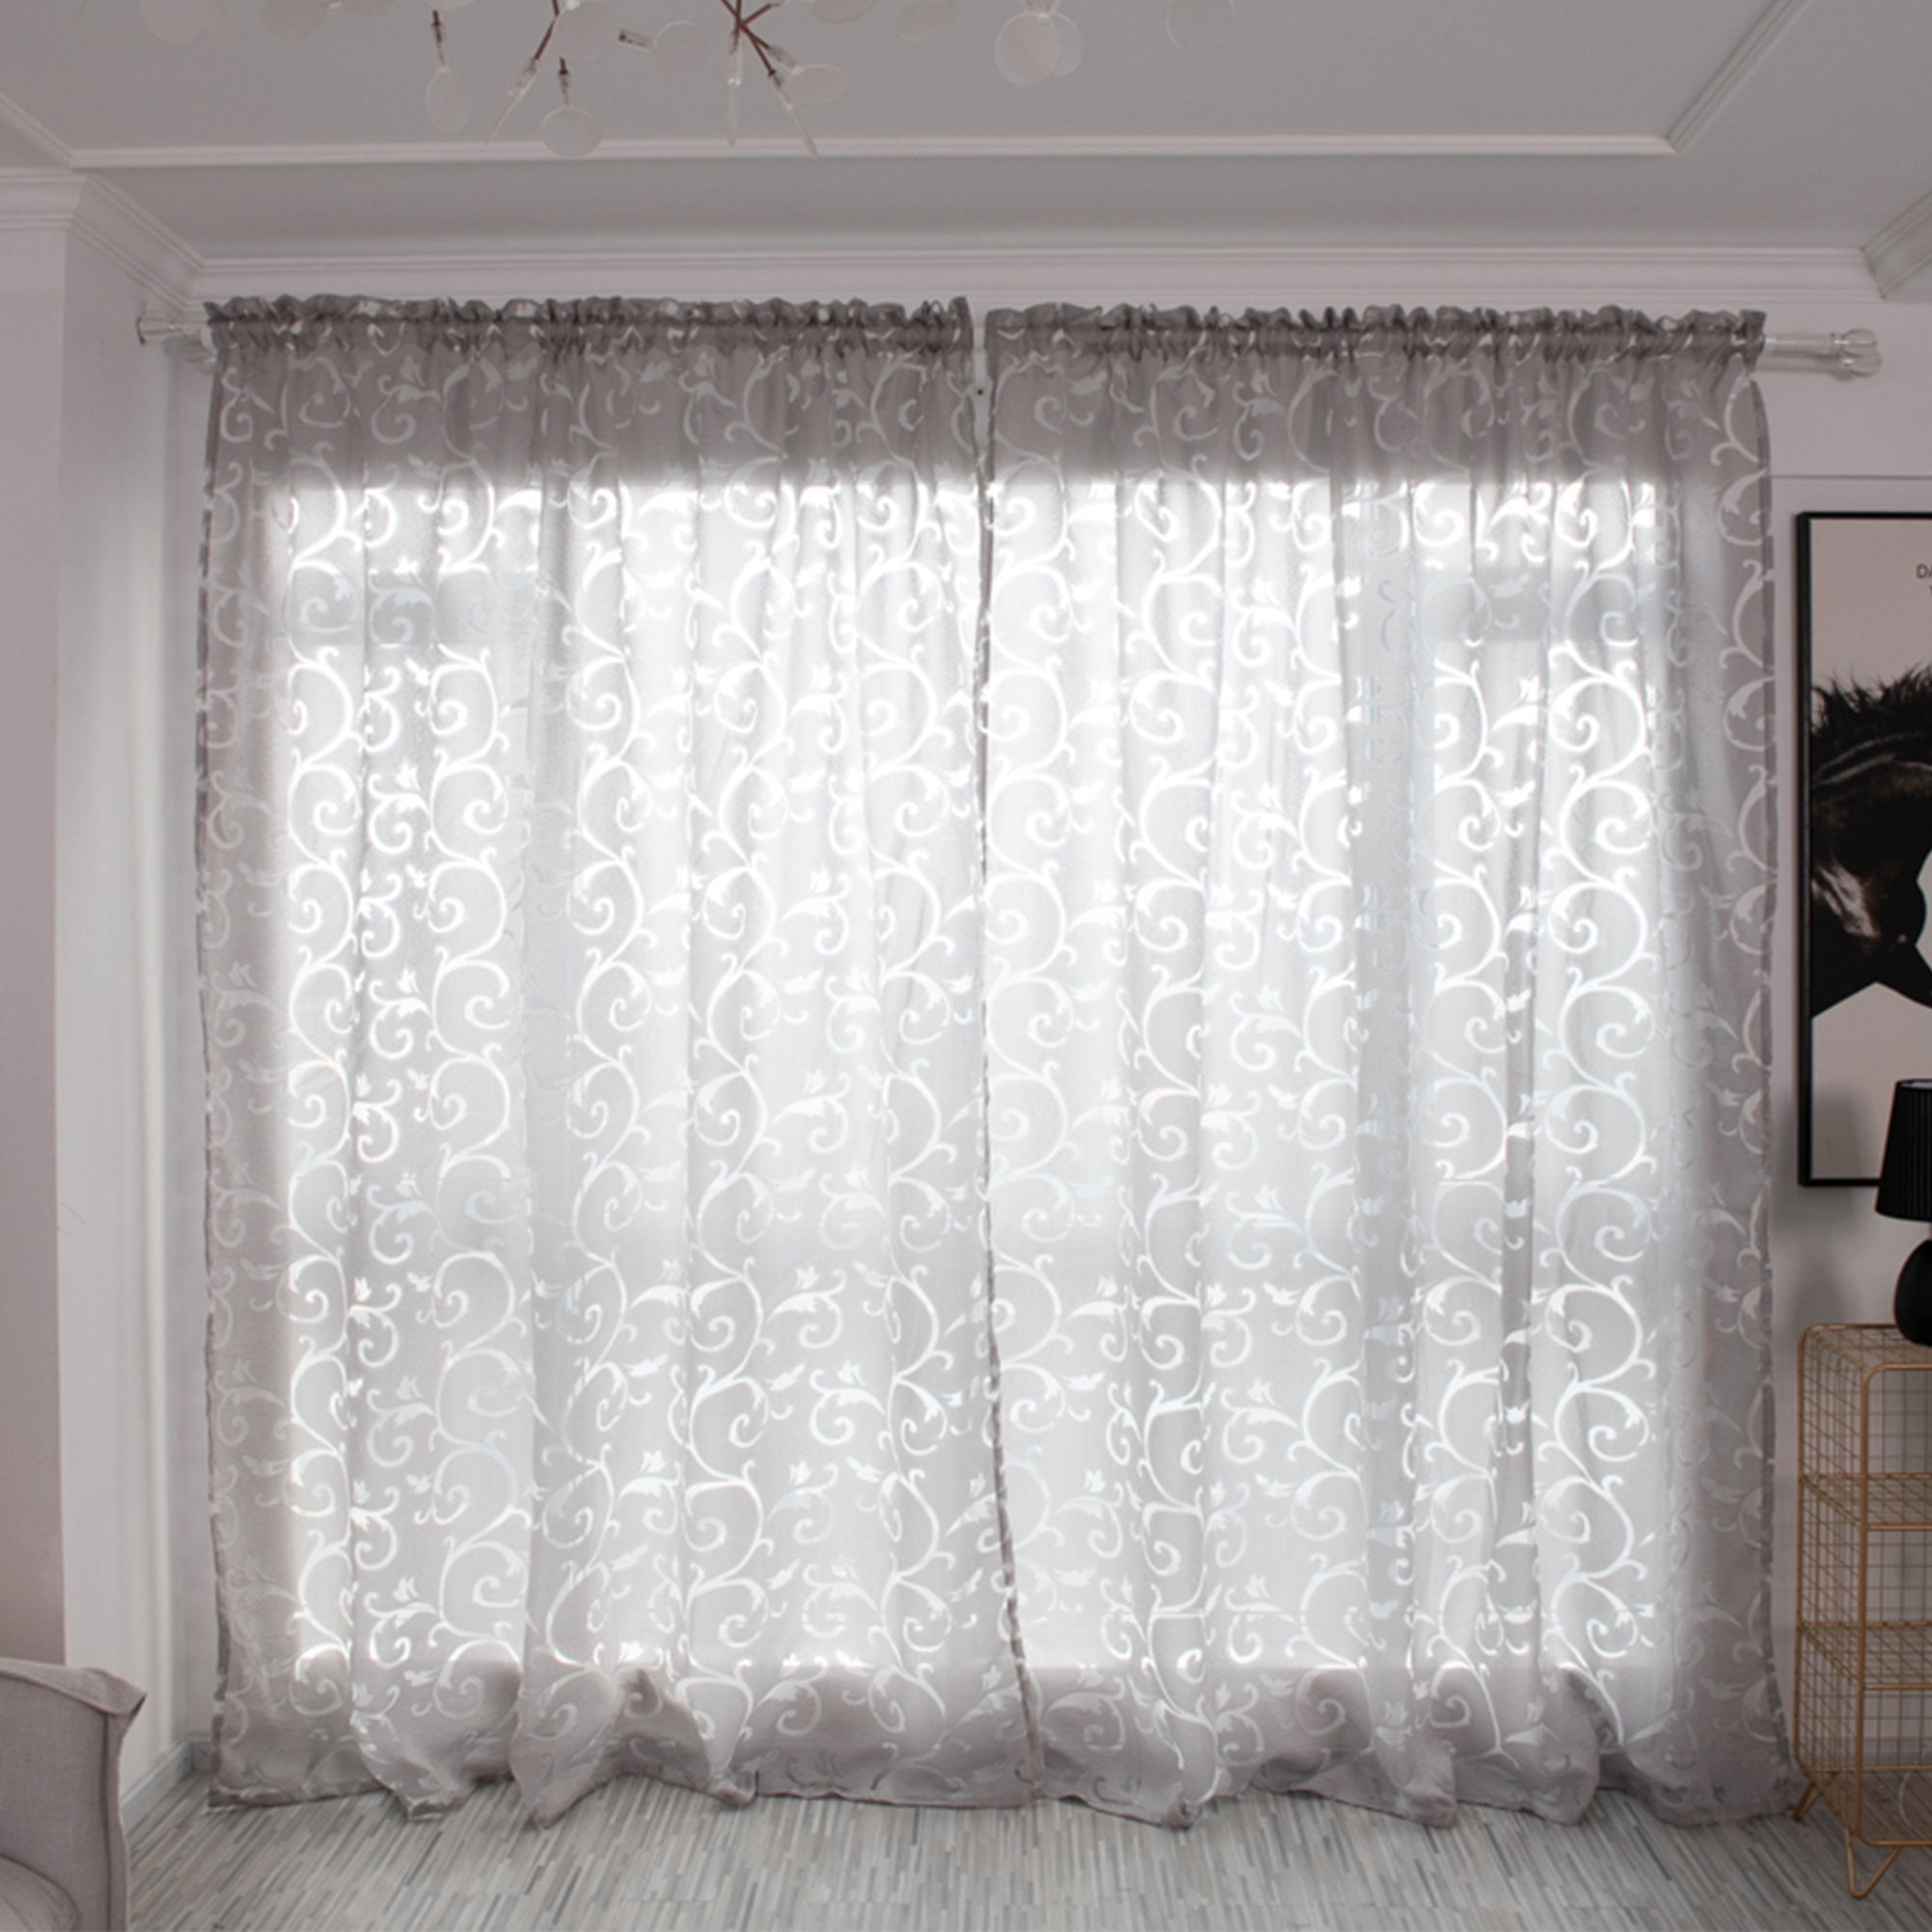 Floral Tulle Voile Door Window Curtain Drape Panel Sheer Scarf Valance DB 